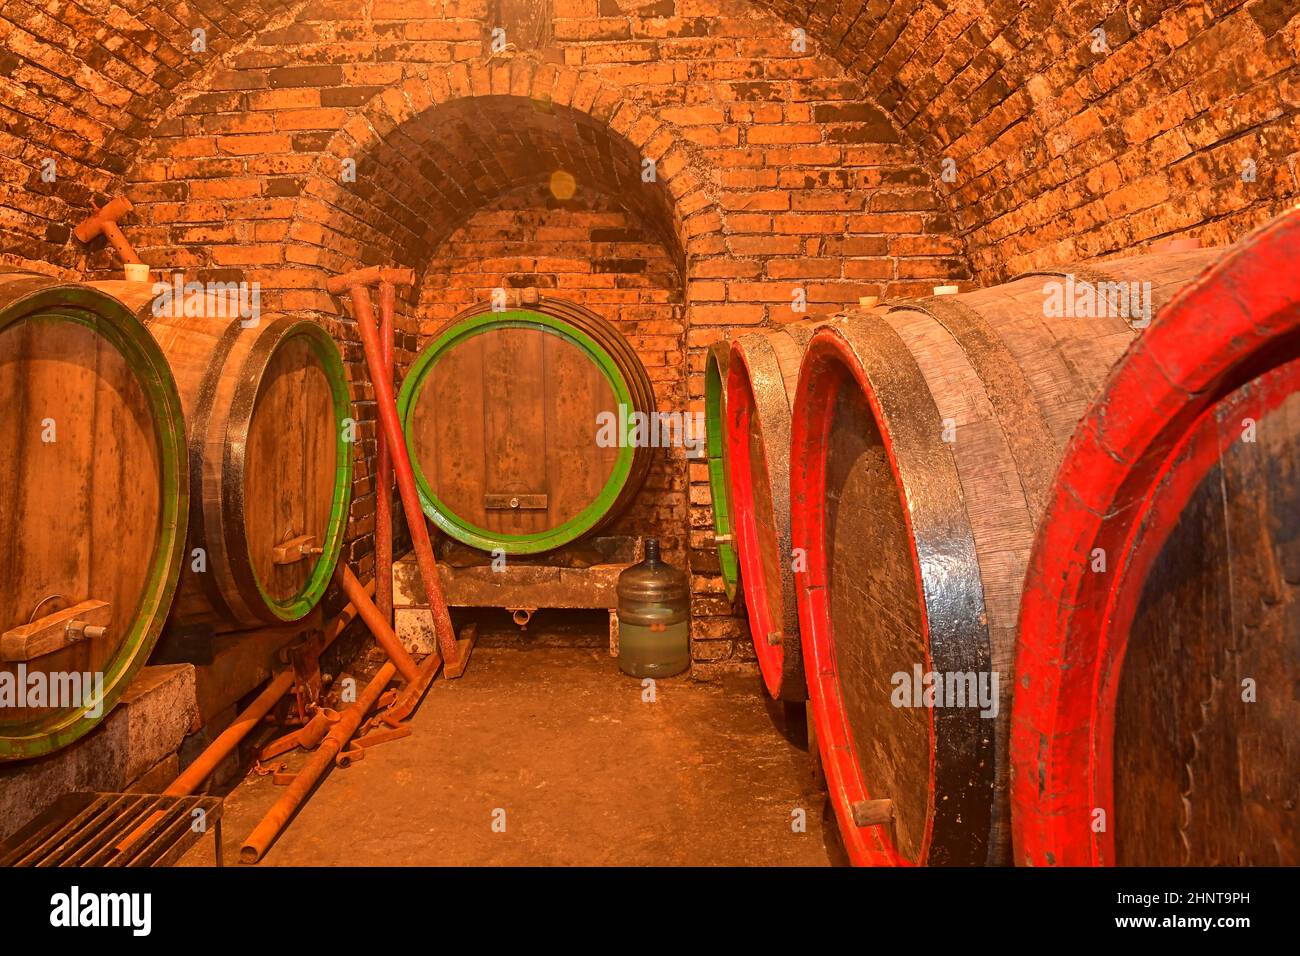 Barrels of wine in a wine cellar, an ancient wine cellar with vaulted brick ceilings. Traditional winemaking Stock Photo